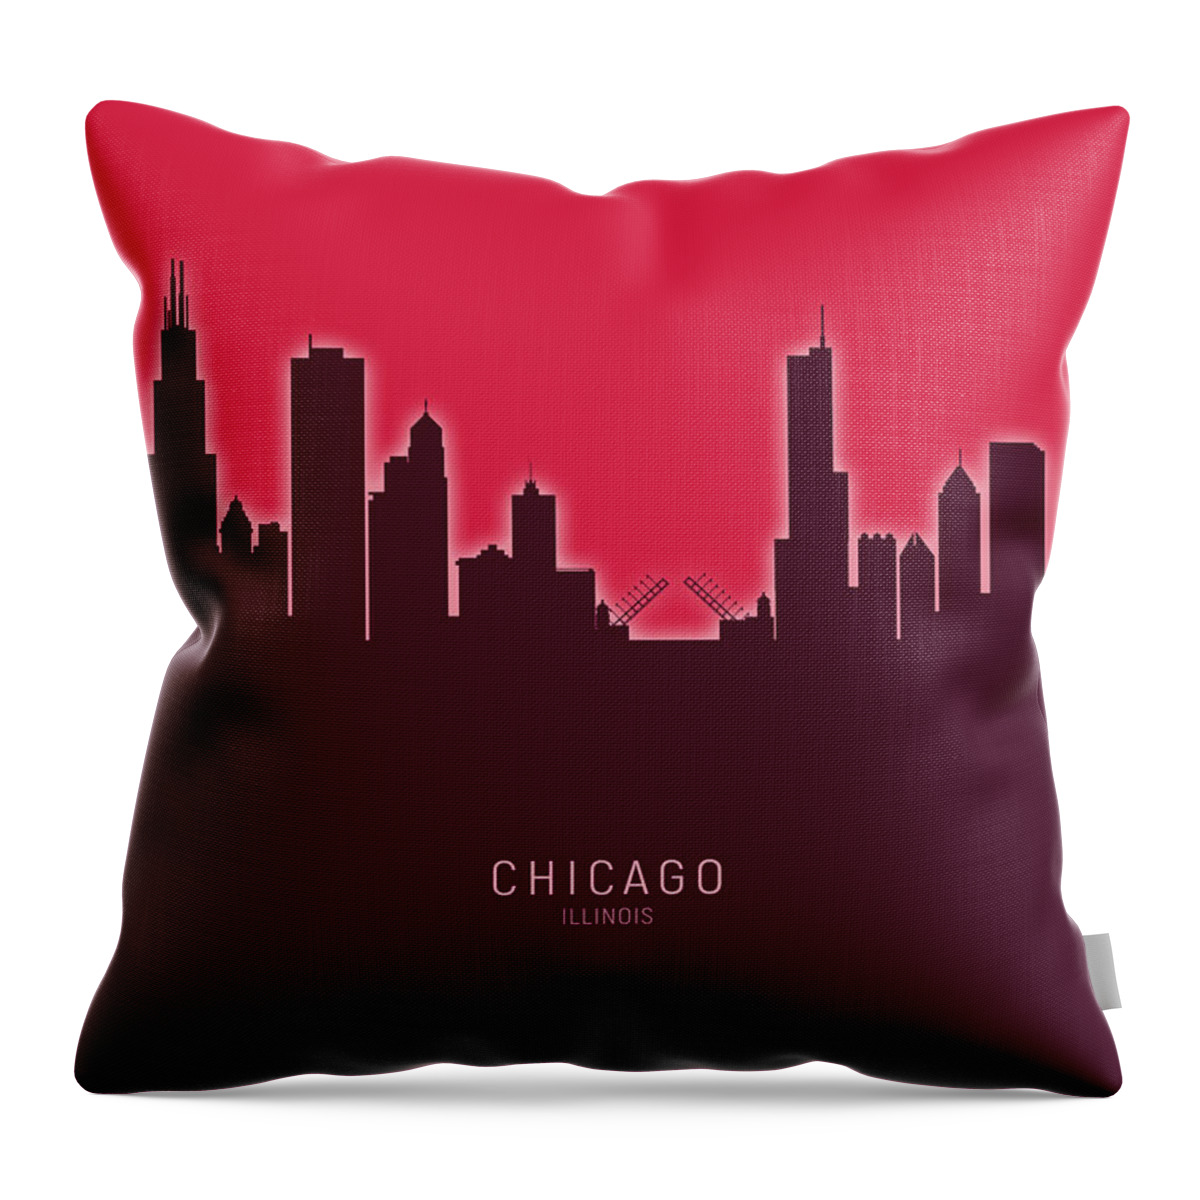 Chicago Throw Pillow featuring the digital art Chicago Illinois Skyline #60 by Michael Tompsett